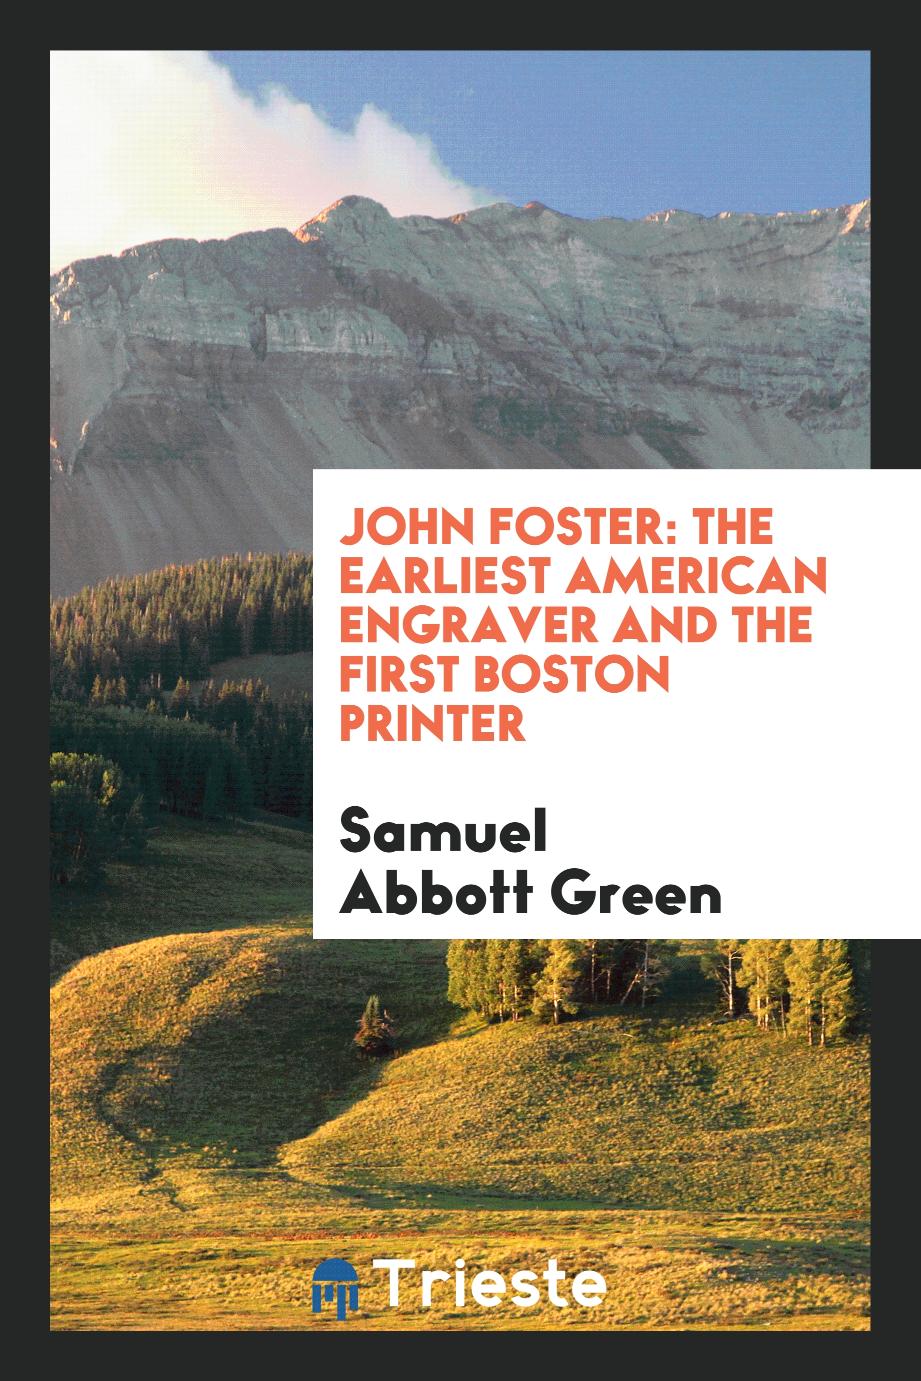 John Foster: The Earliest American Engraver and the First Boston Printer